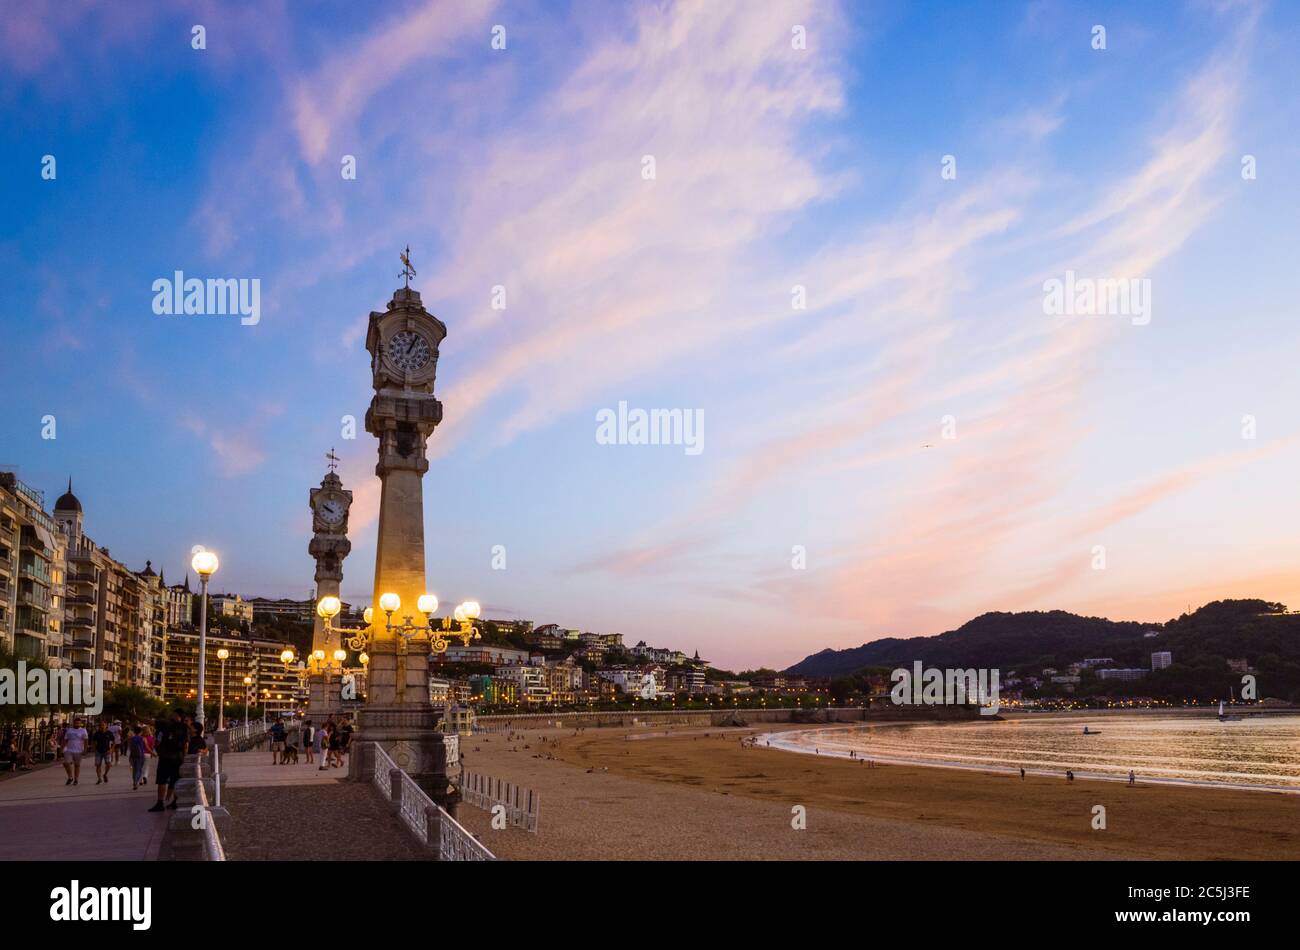 Donostia, Gipuzkoa, Basque Country, Spain - July 12th, 2019 : View of the promenade and La Concha beach at sunset. Incidental people in background. Stock Photo